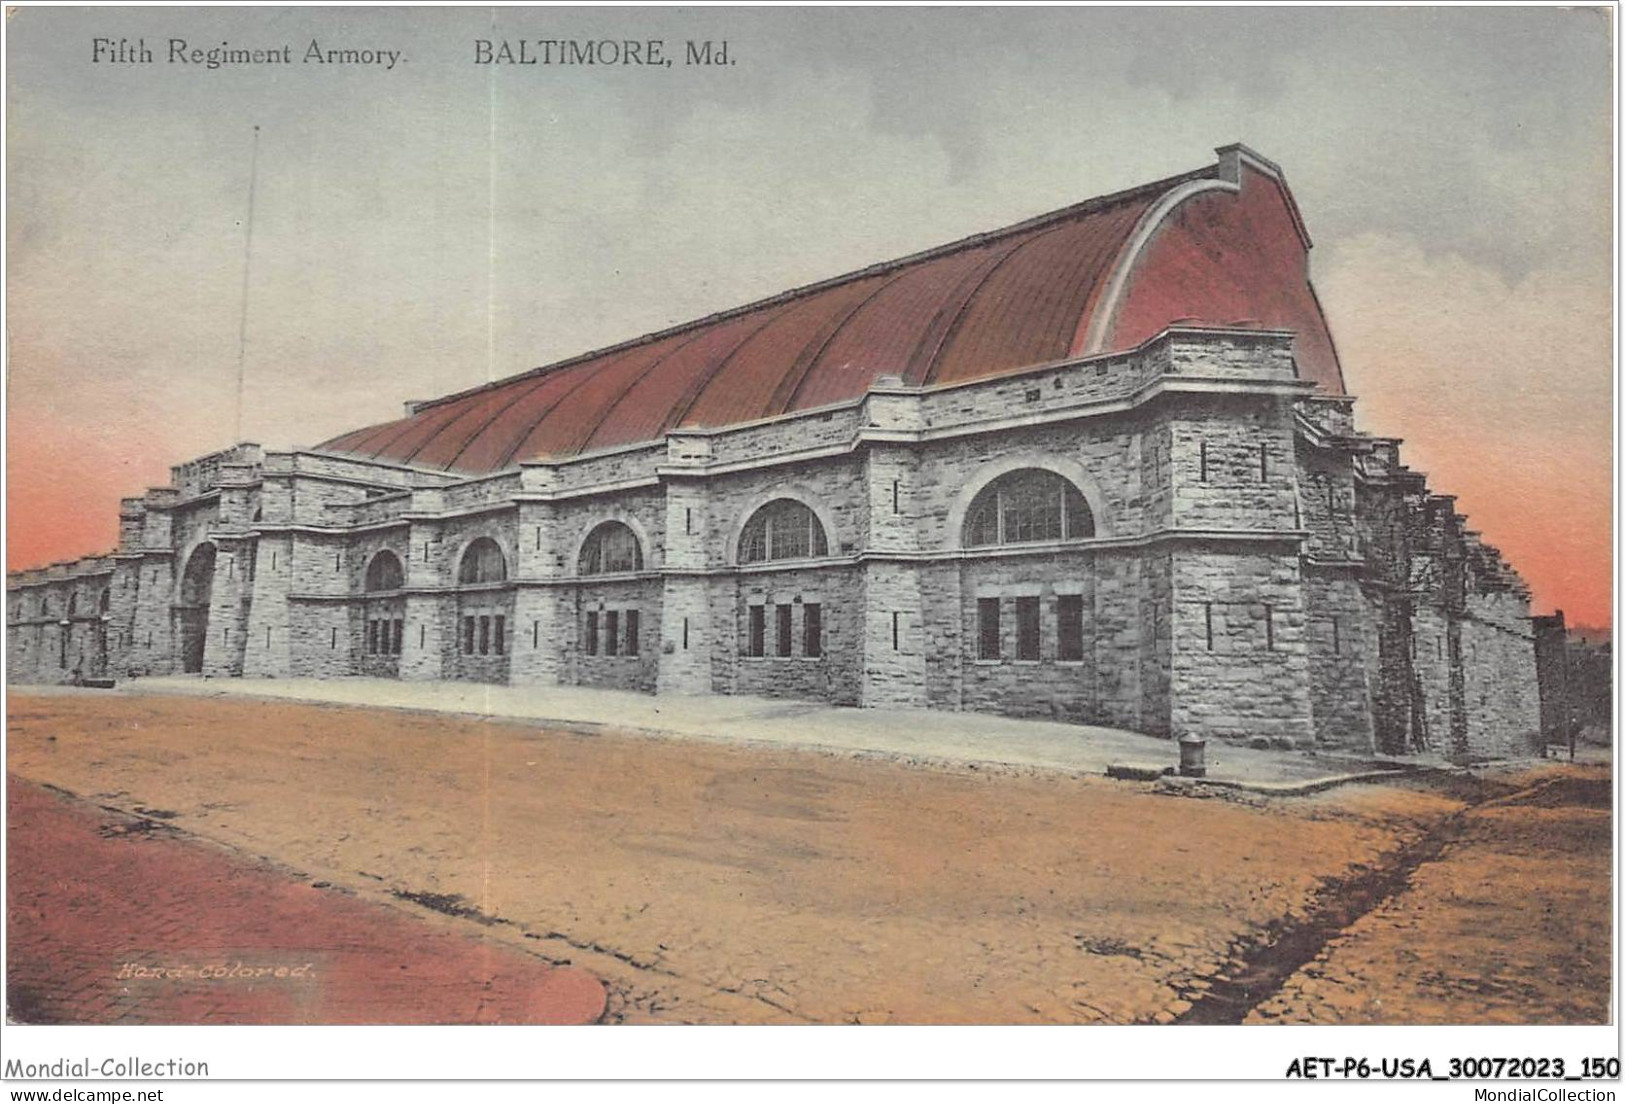 AETP6-USA-0510 - BALTIMORE - MD - Fifth Regiment Armory - Baltimore